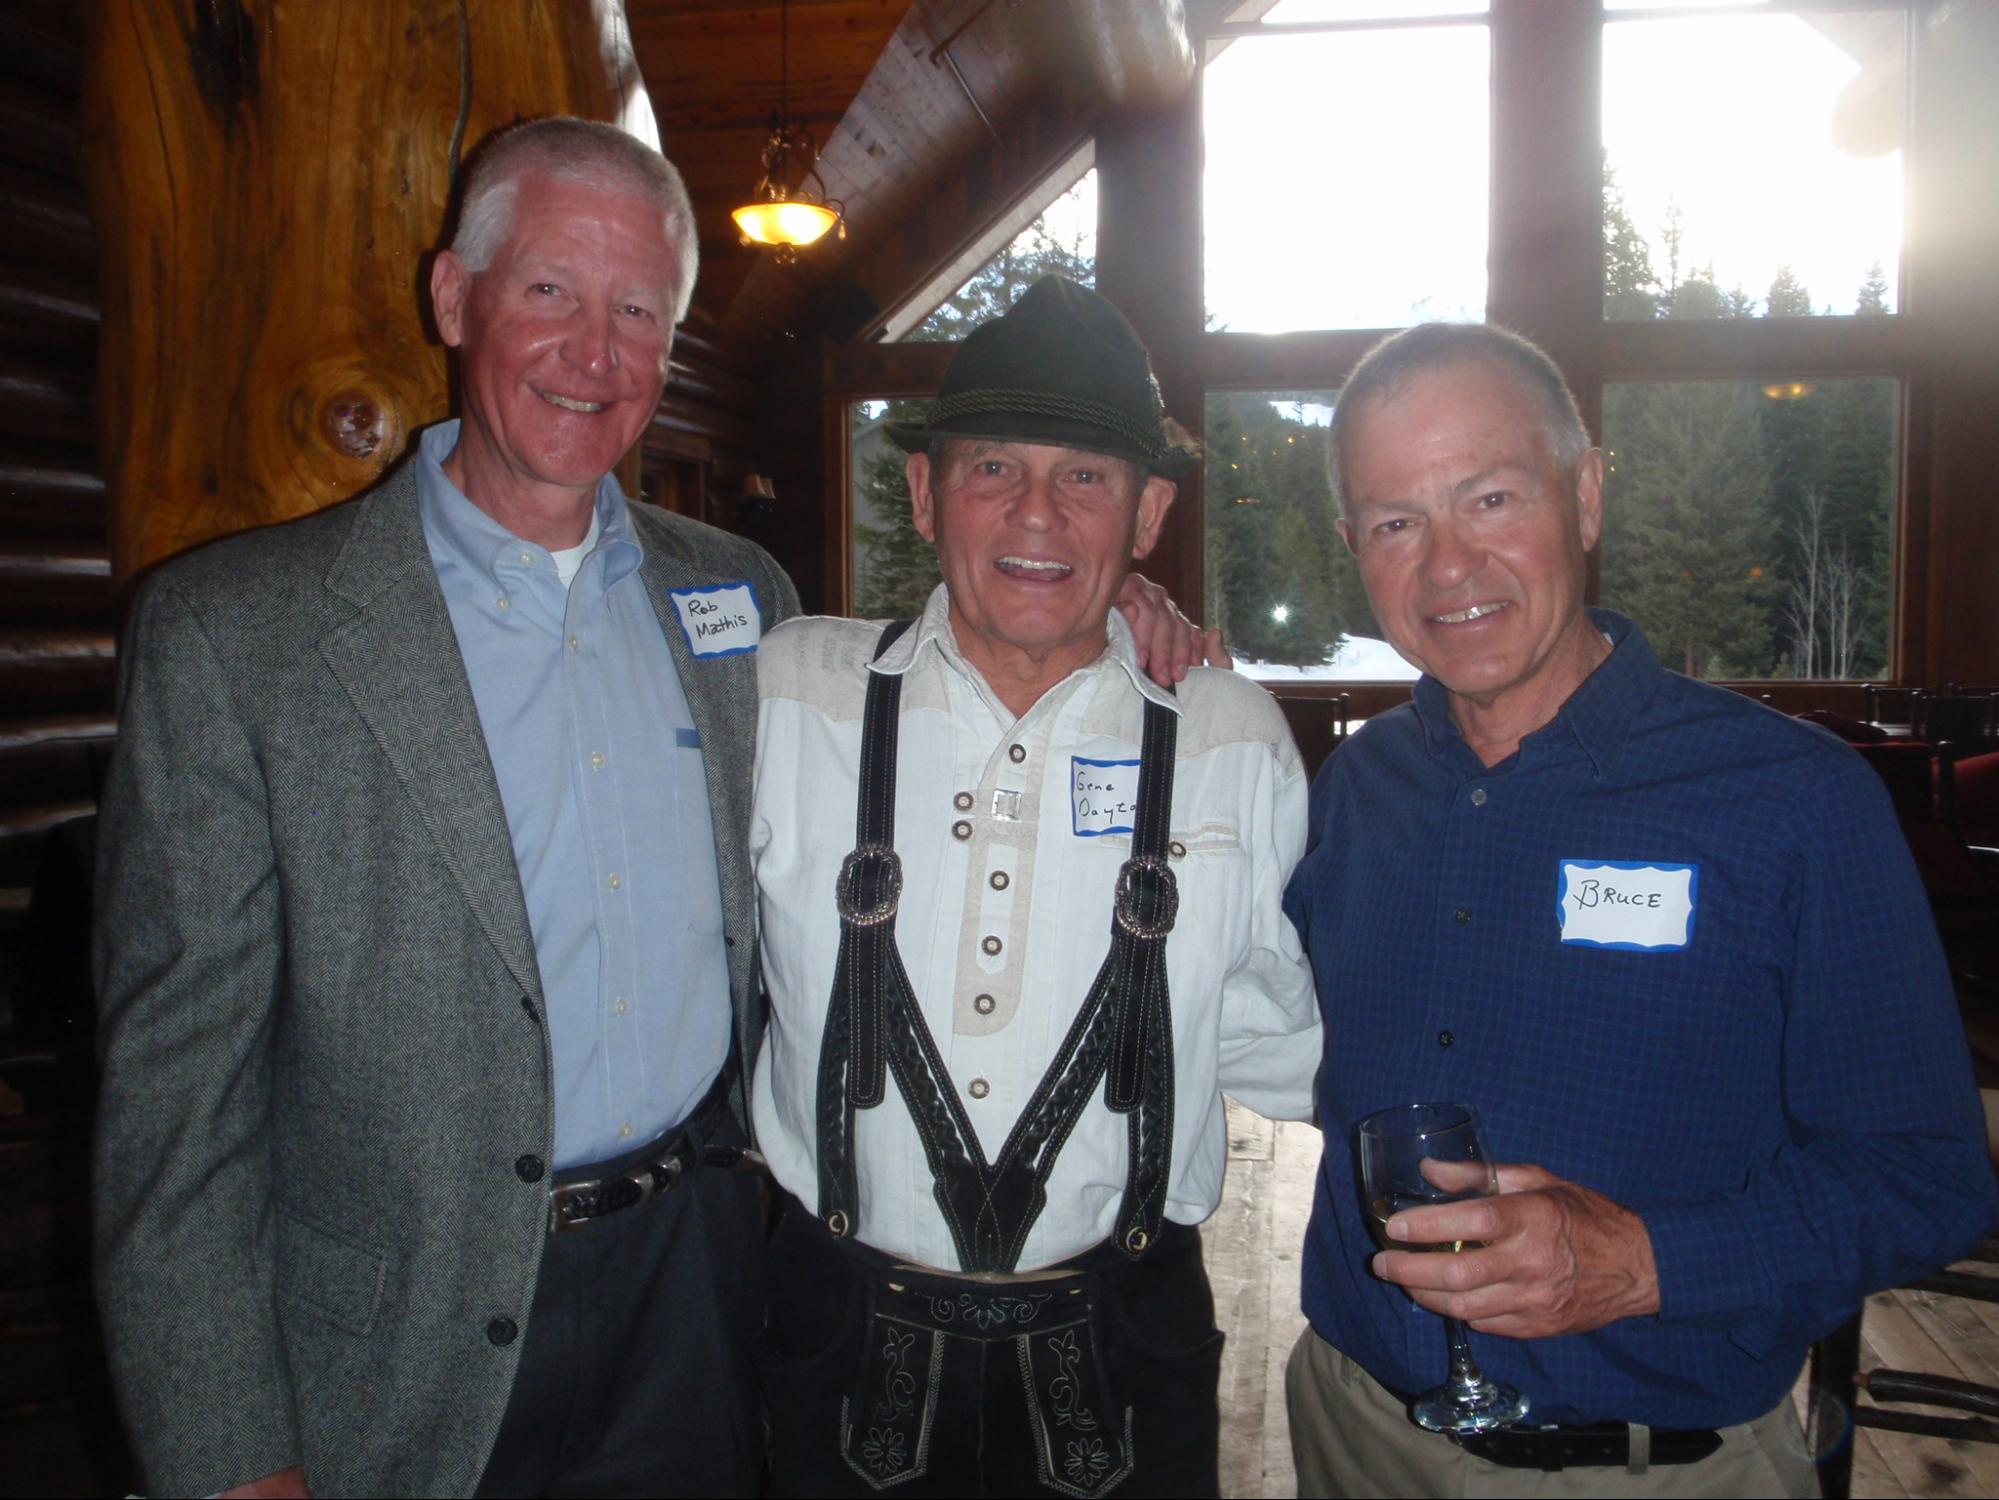 Gene at the capital campaign reception in 2016 at the Breckenridge Nordic Center with Rob Mathis and Bruce Fitch.